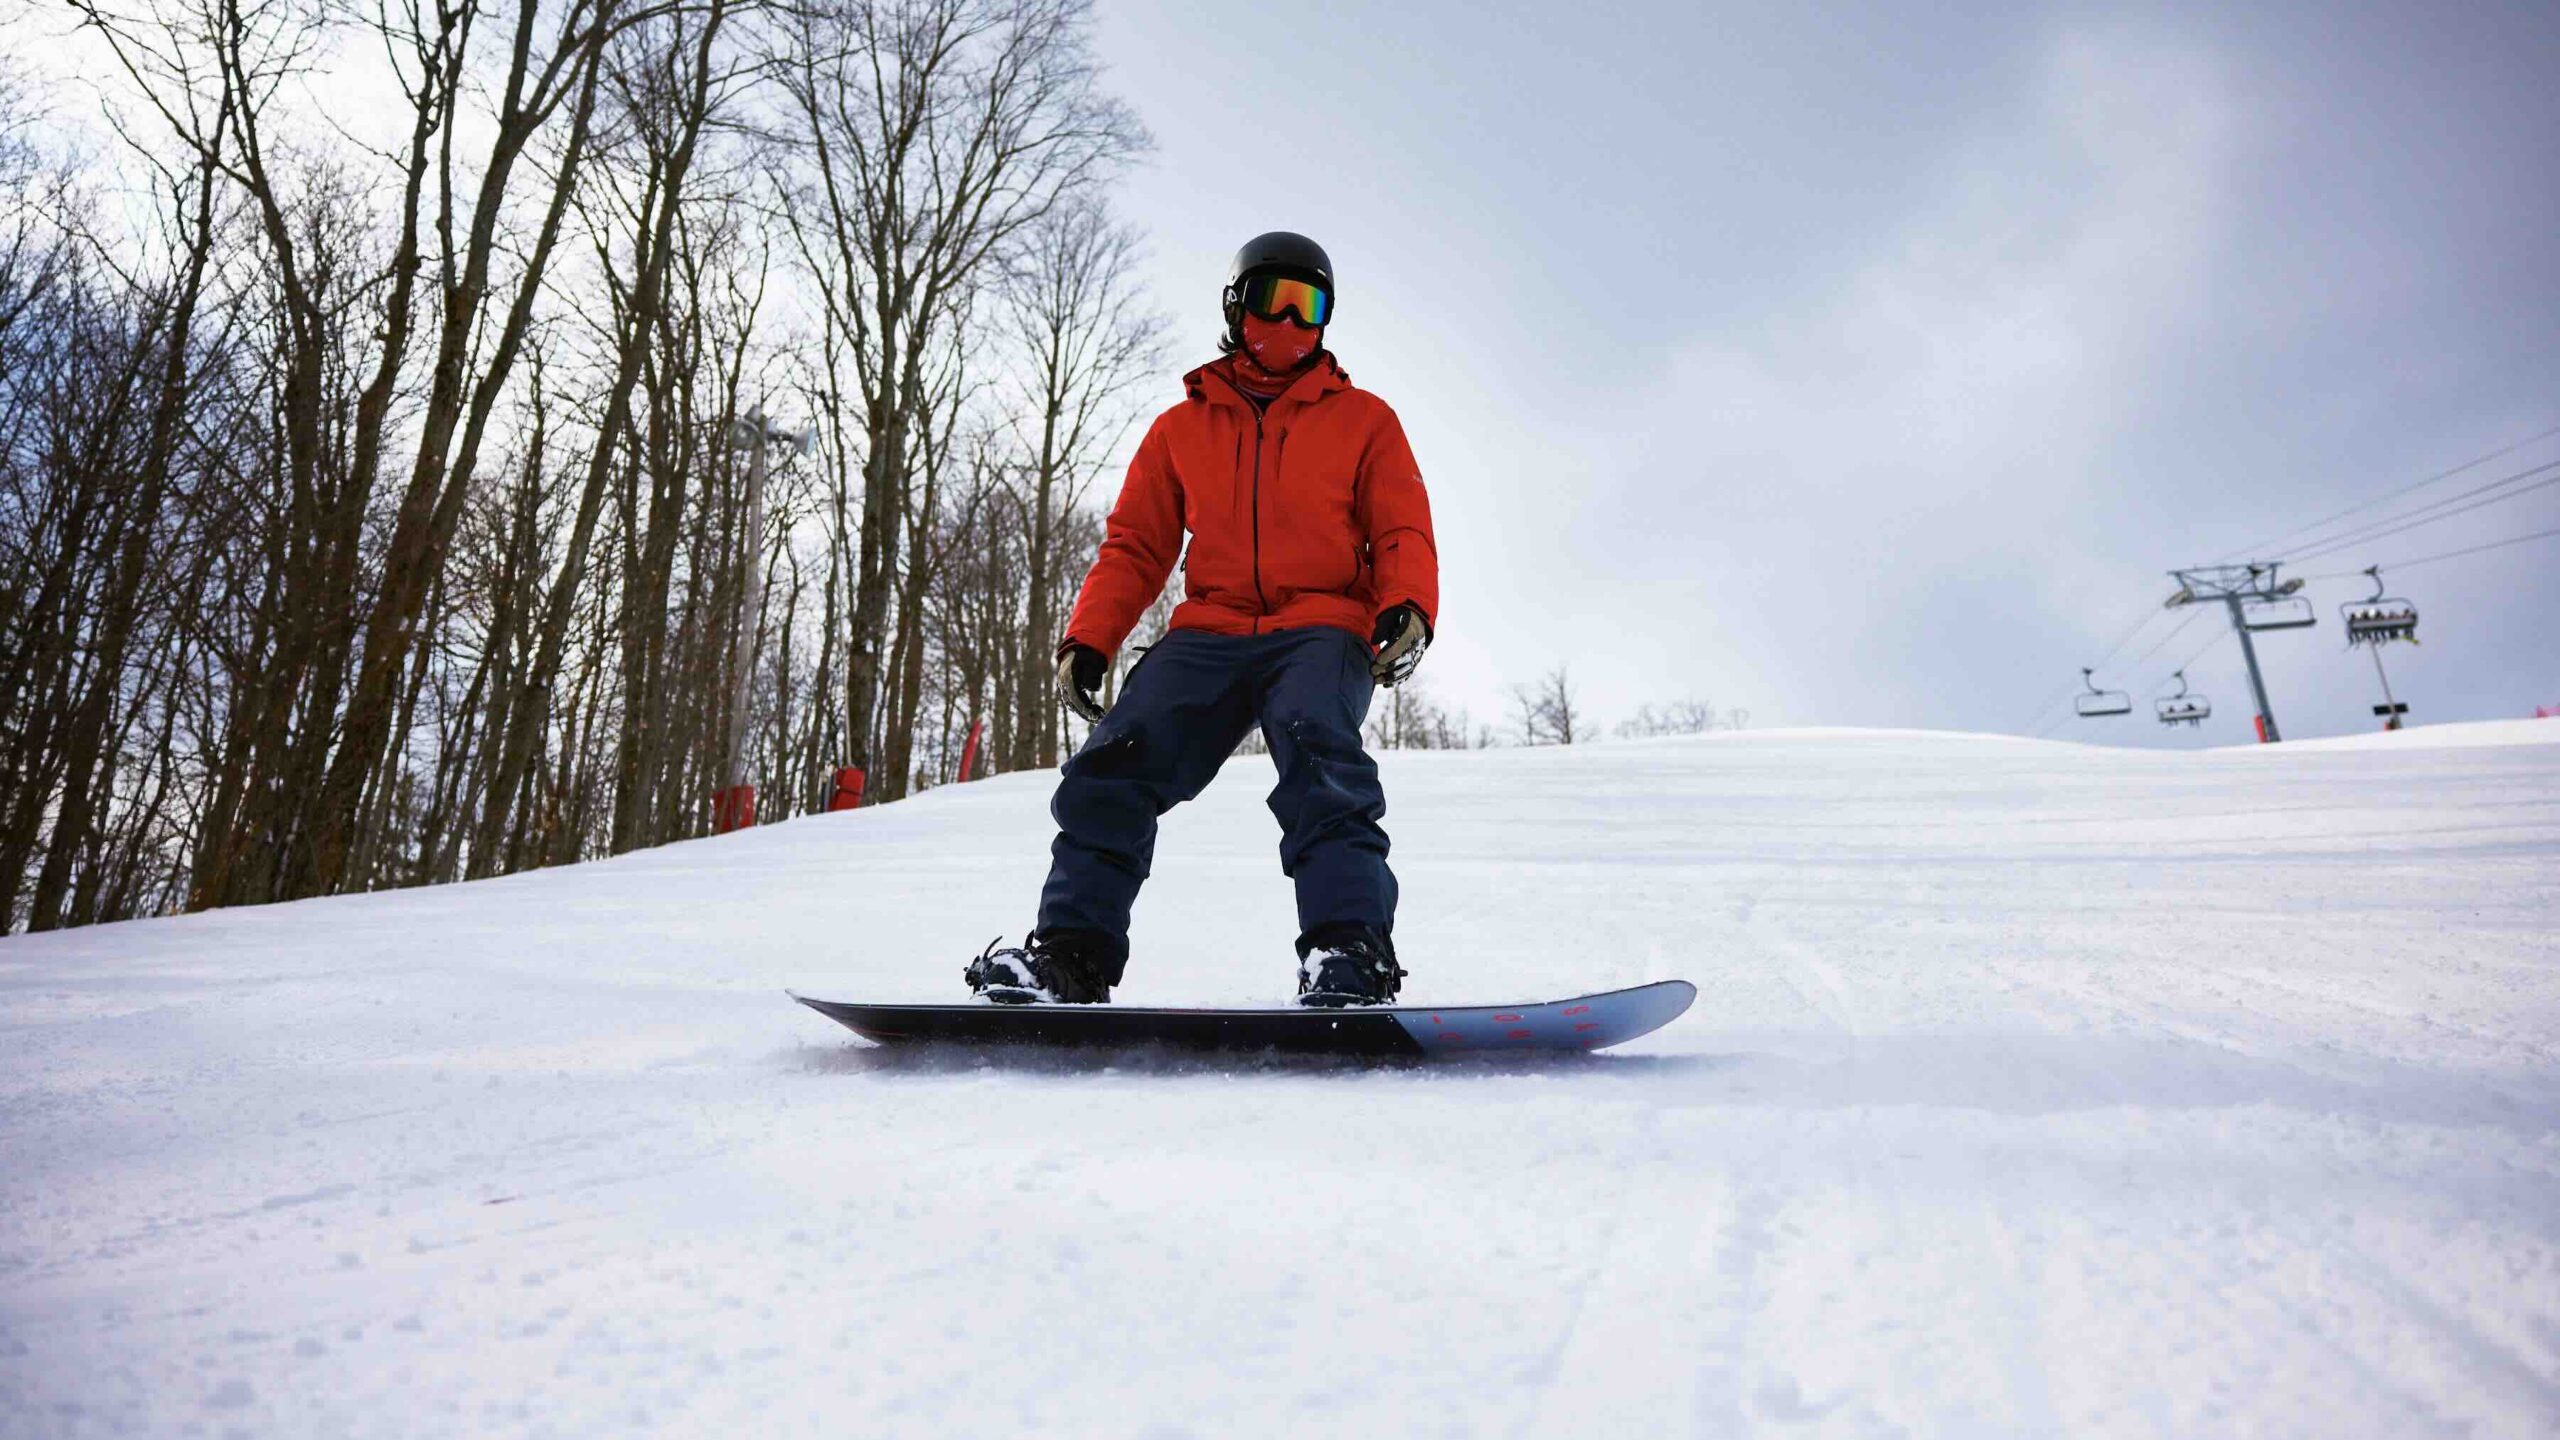 Slopeside at Hoseshoe Resort snowboarder at one of the best luxury ski resorts in Ontario